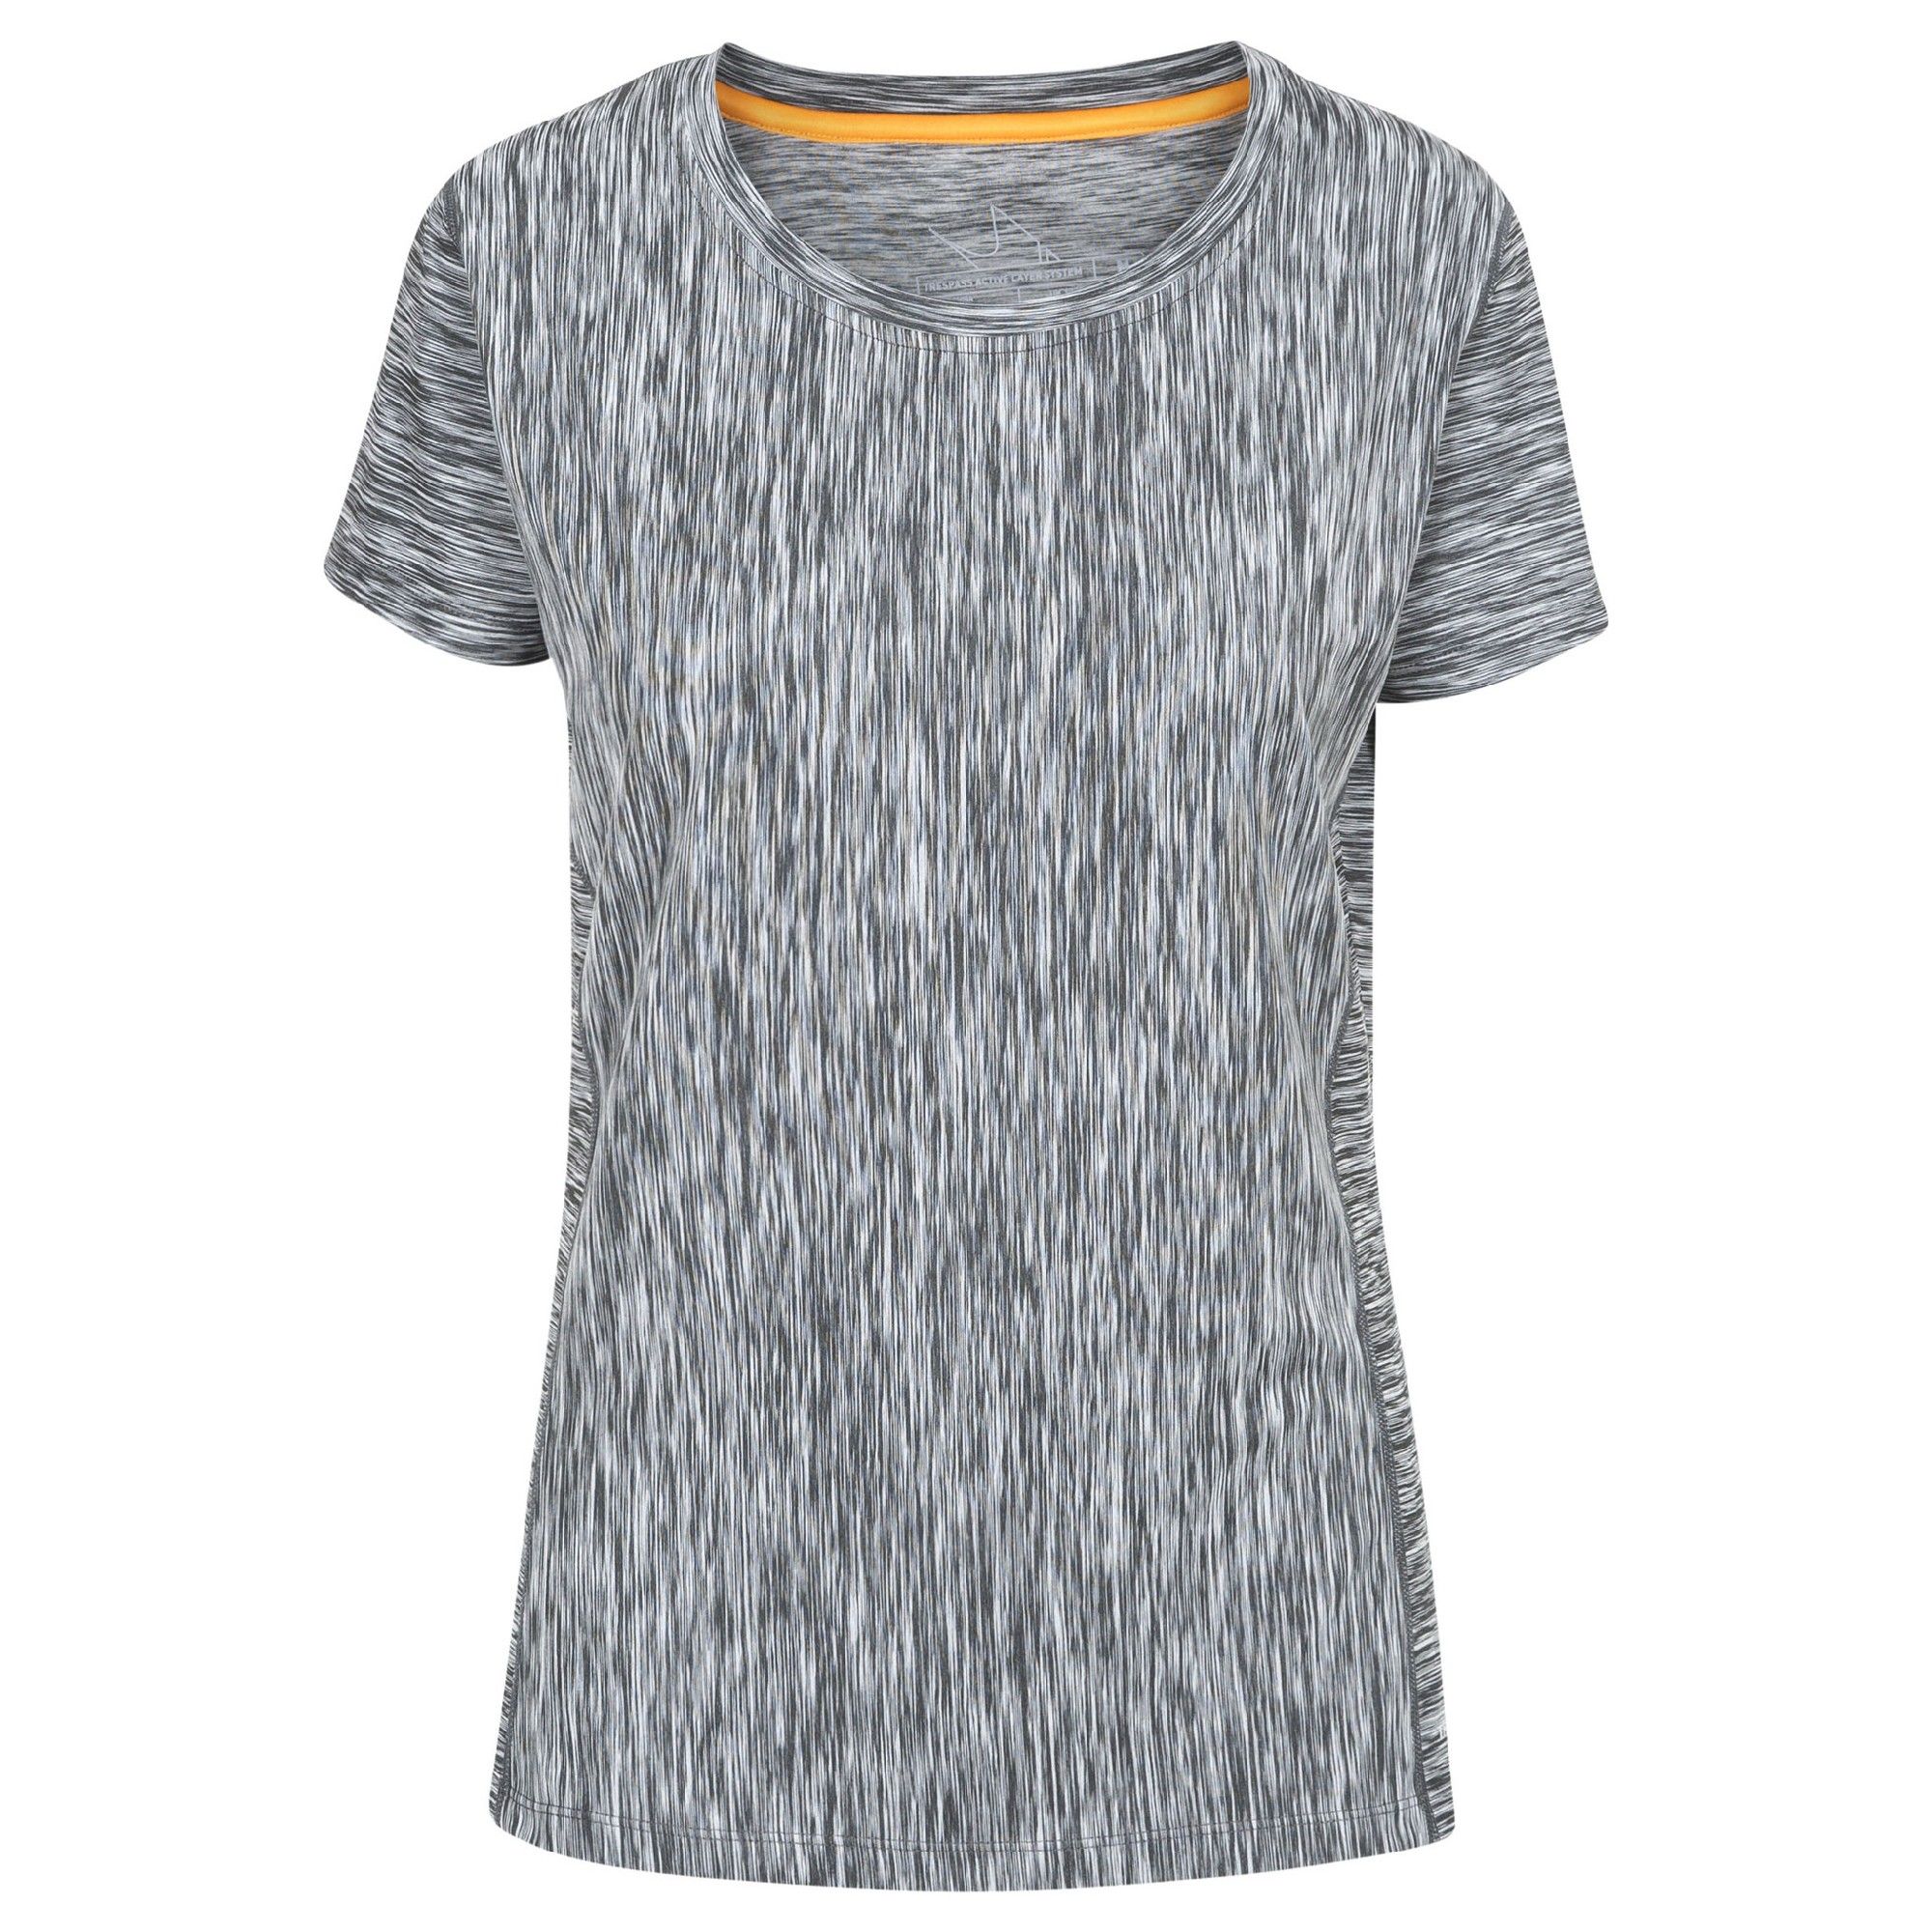 Short sleeve. Round neck. Reflective logos. Wicking. Quick dry. 91% Polyester/9% Elastane. Trespass Womens Chest Sizing (approx): XS/8 - 32in/81cm, S/10 - 34in/86cm, M/12 - 36in/91.4cm, L/14 - 38in/96.5cm, XL/16 - 40in/101.5cm, XXL/18 - 42in/106.5cm.